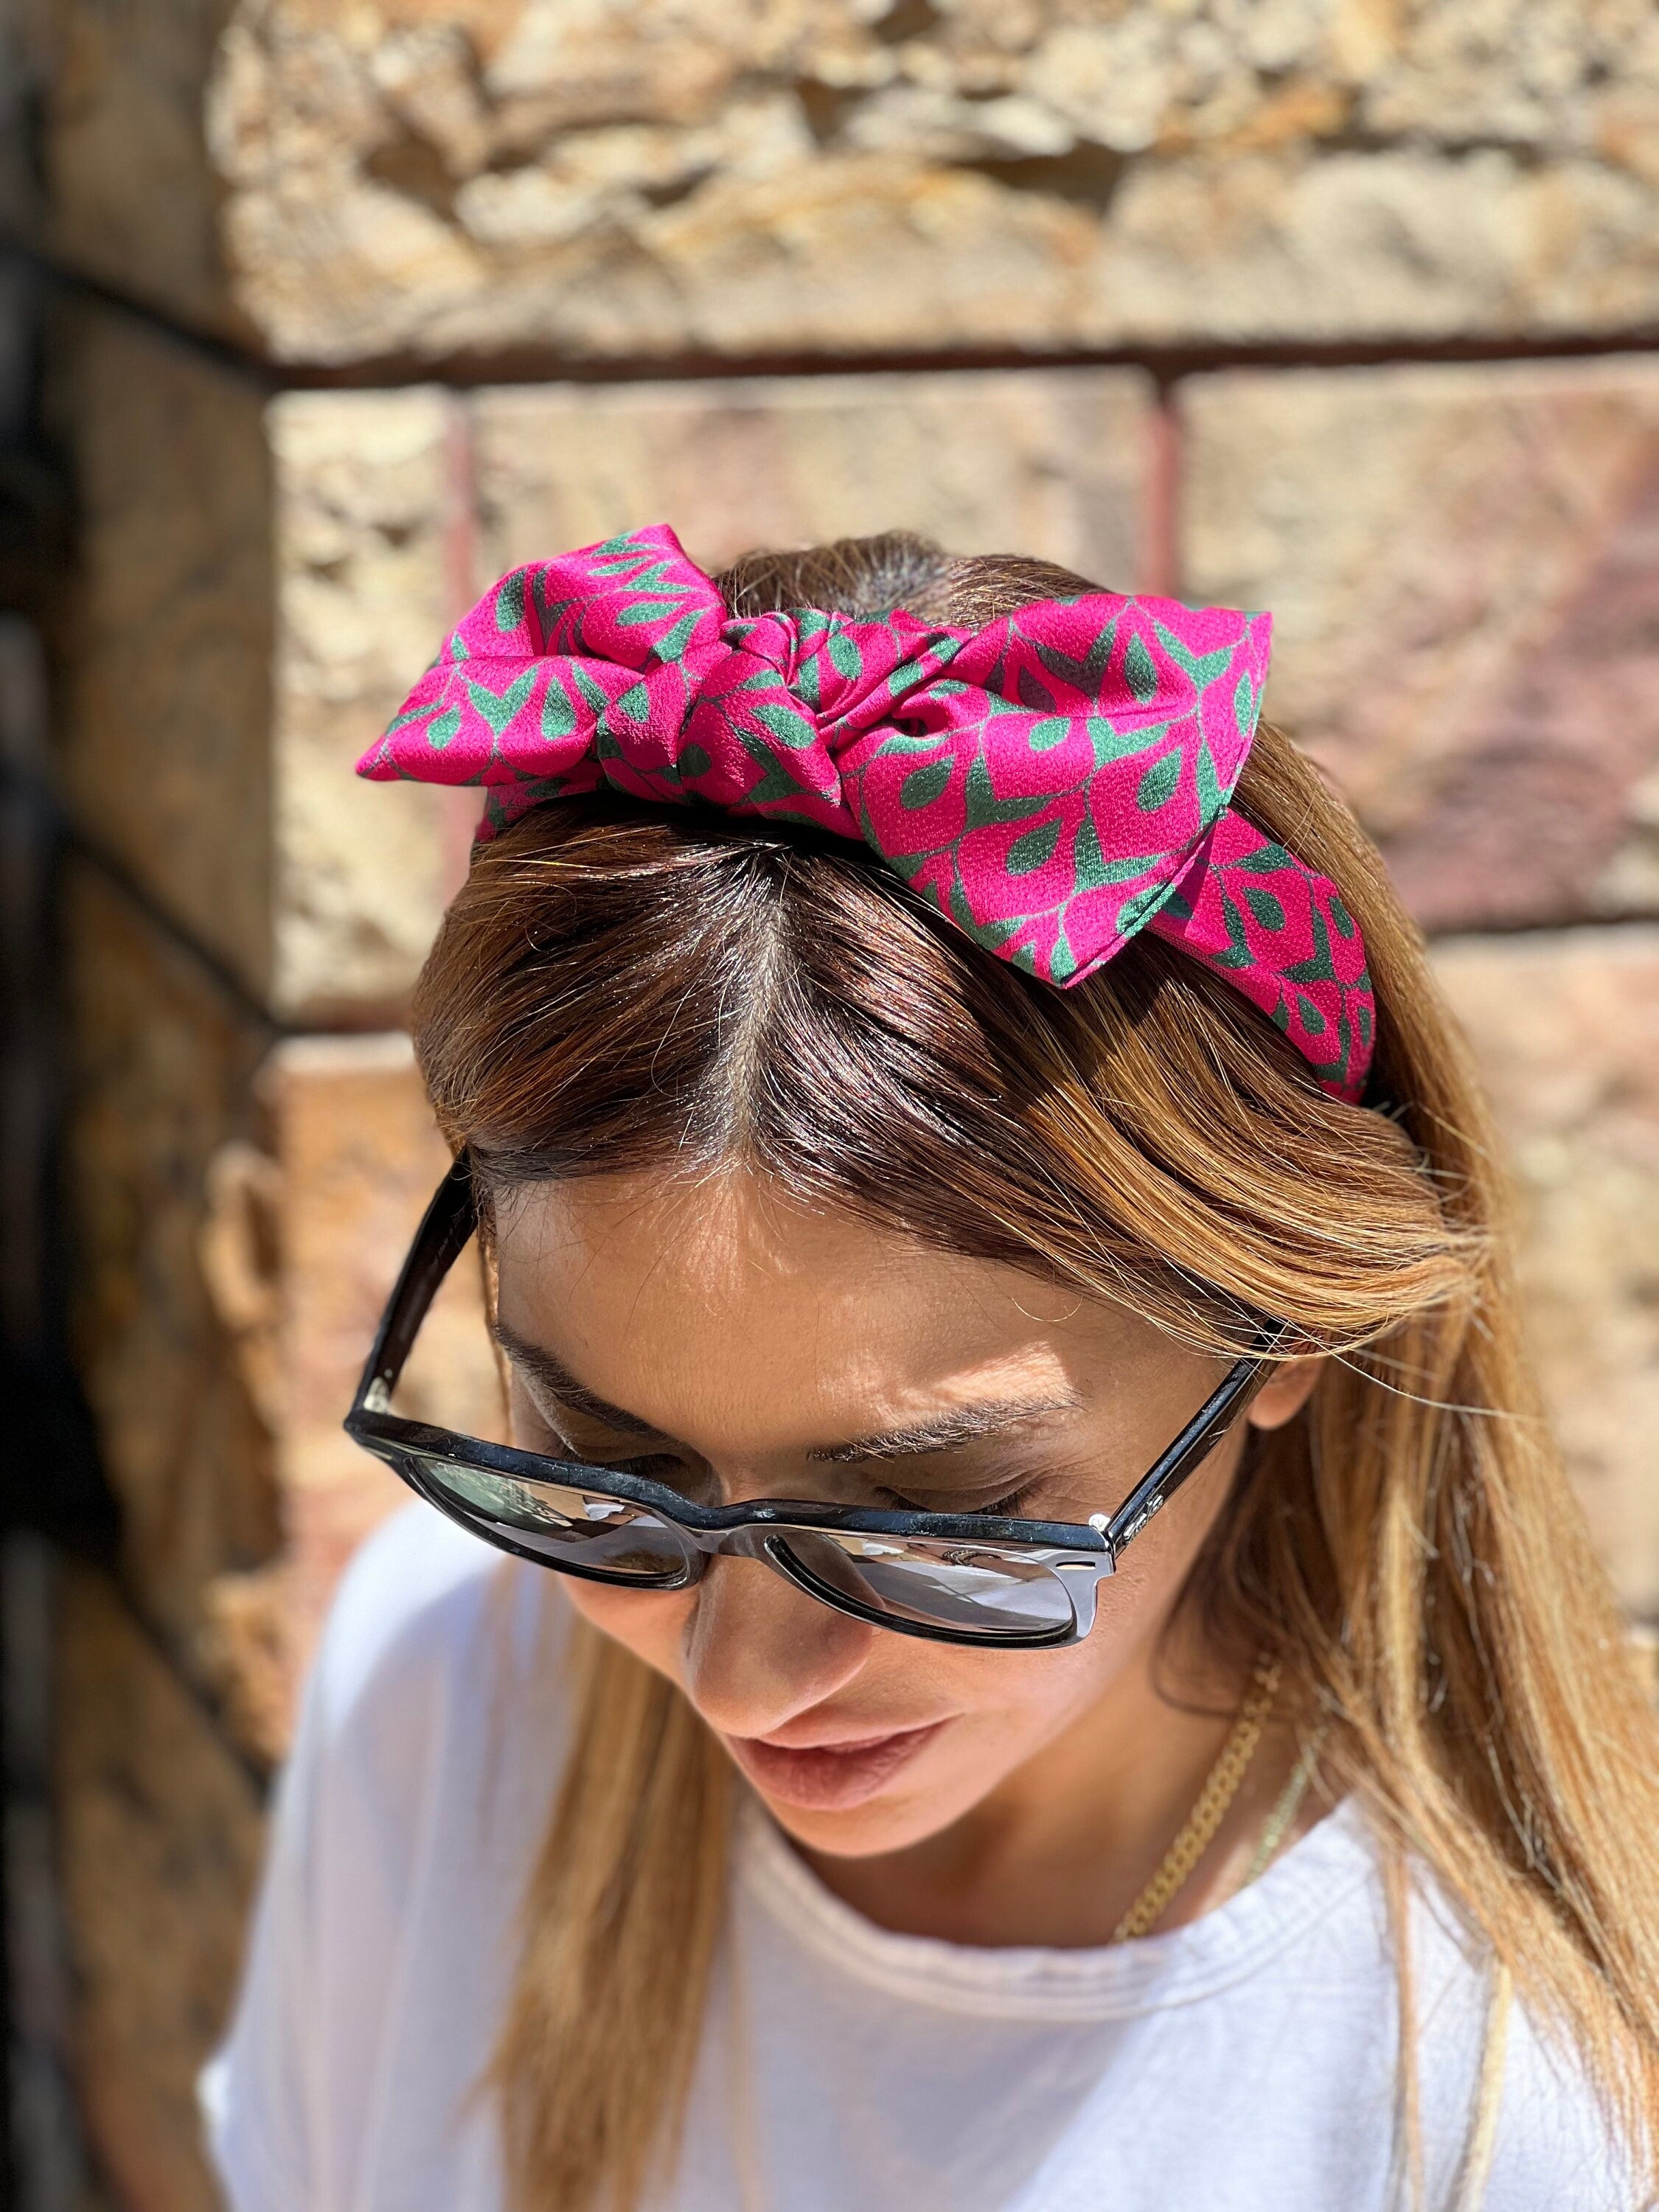 This hair tie headband is perfect for any fashion-forward woman